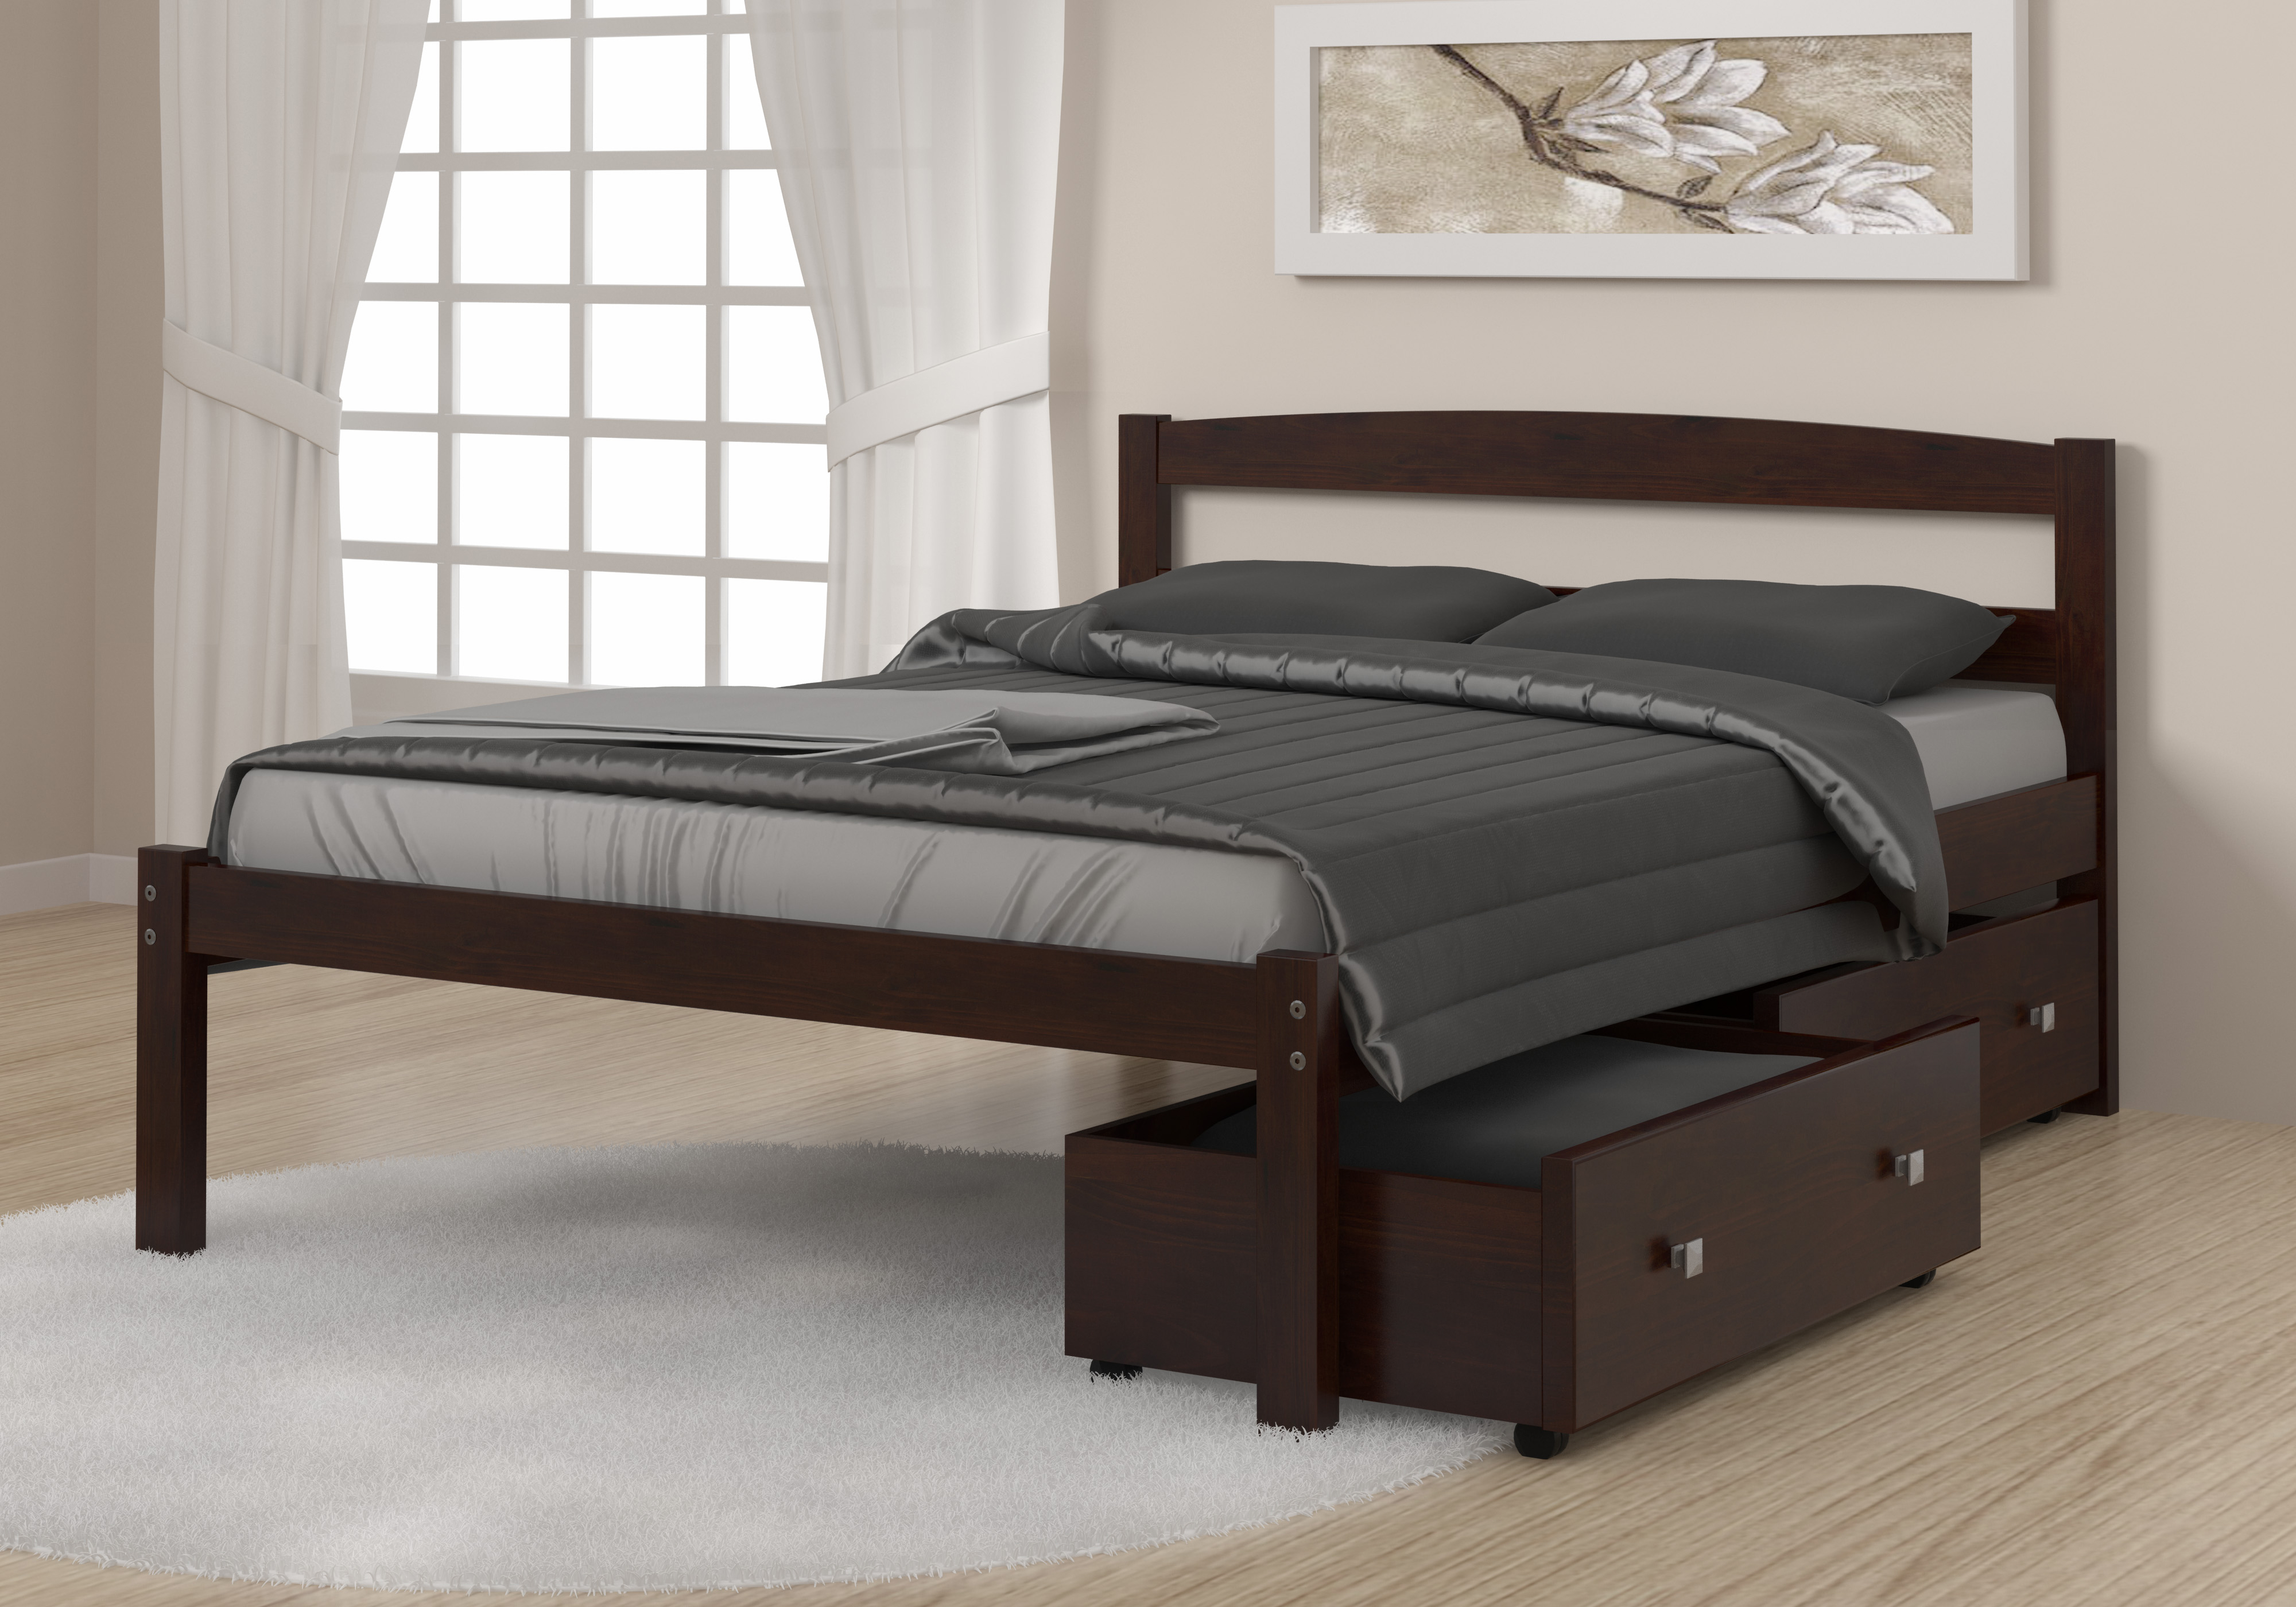 Donco Trading Company Econo Full Bed With Dual Under Bed Drawers